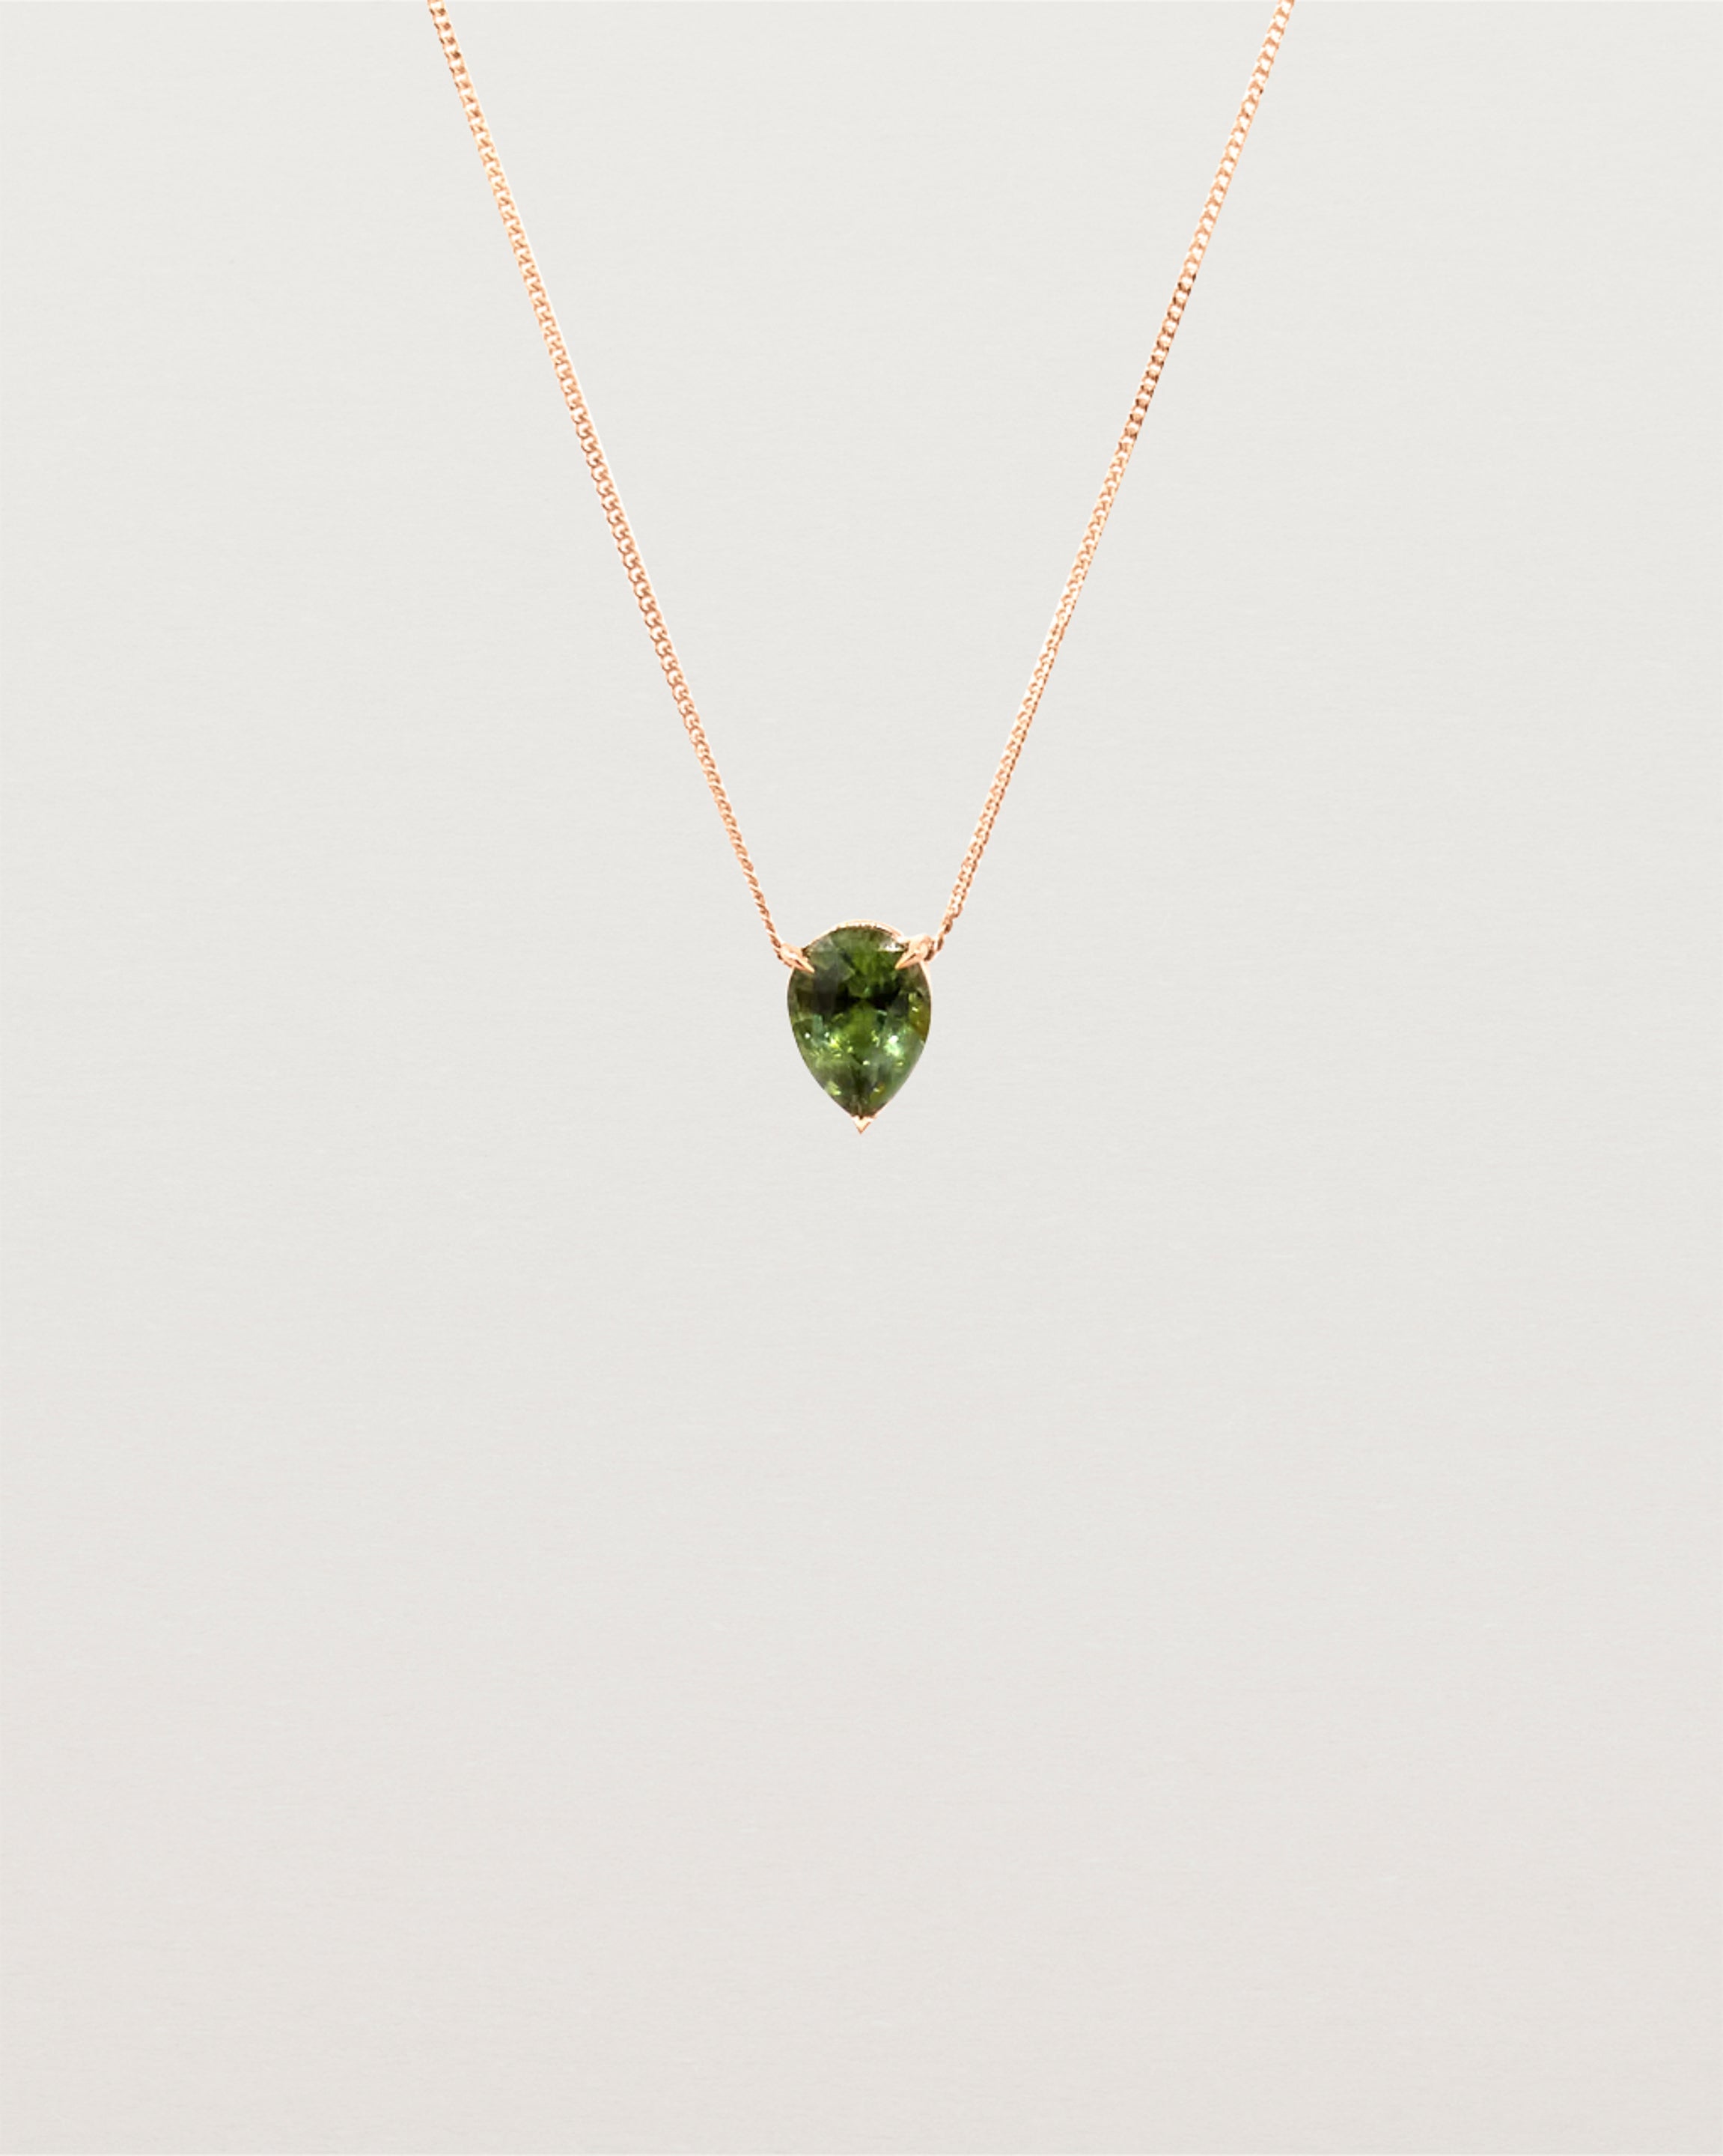 A Madagascan pear sapphire, is set in our classic slider pendant design. 